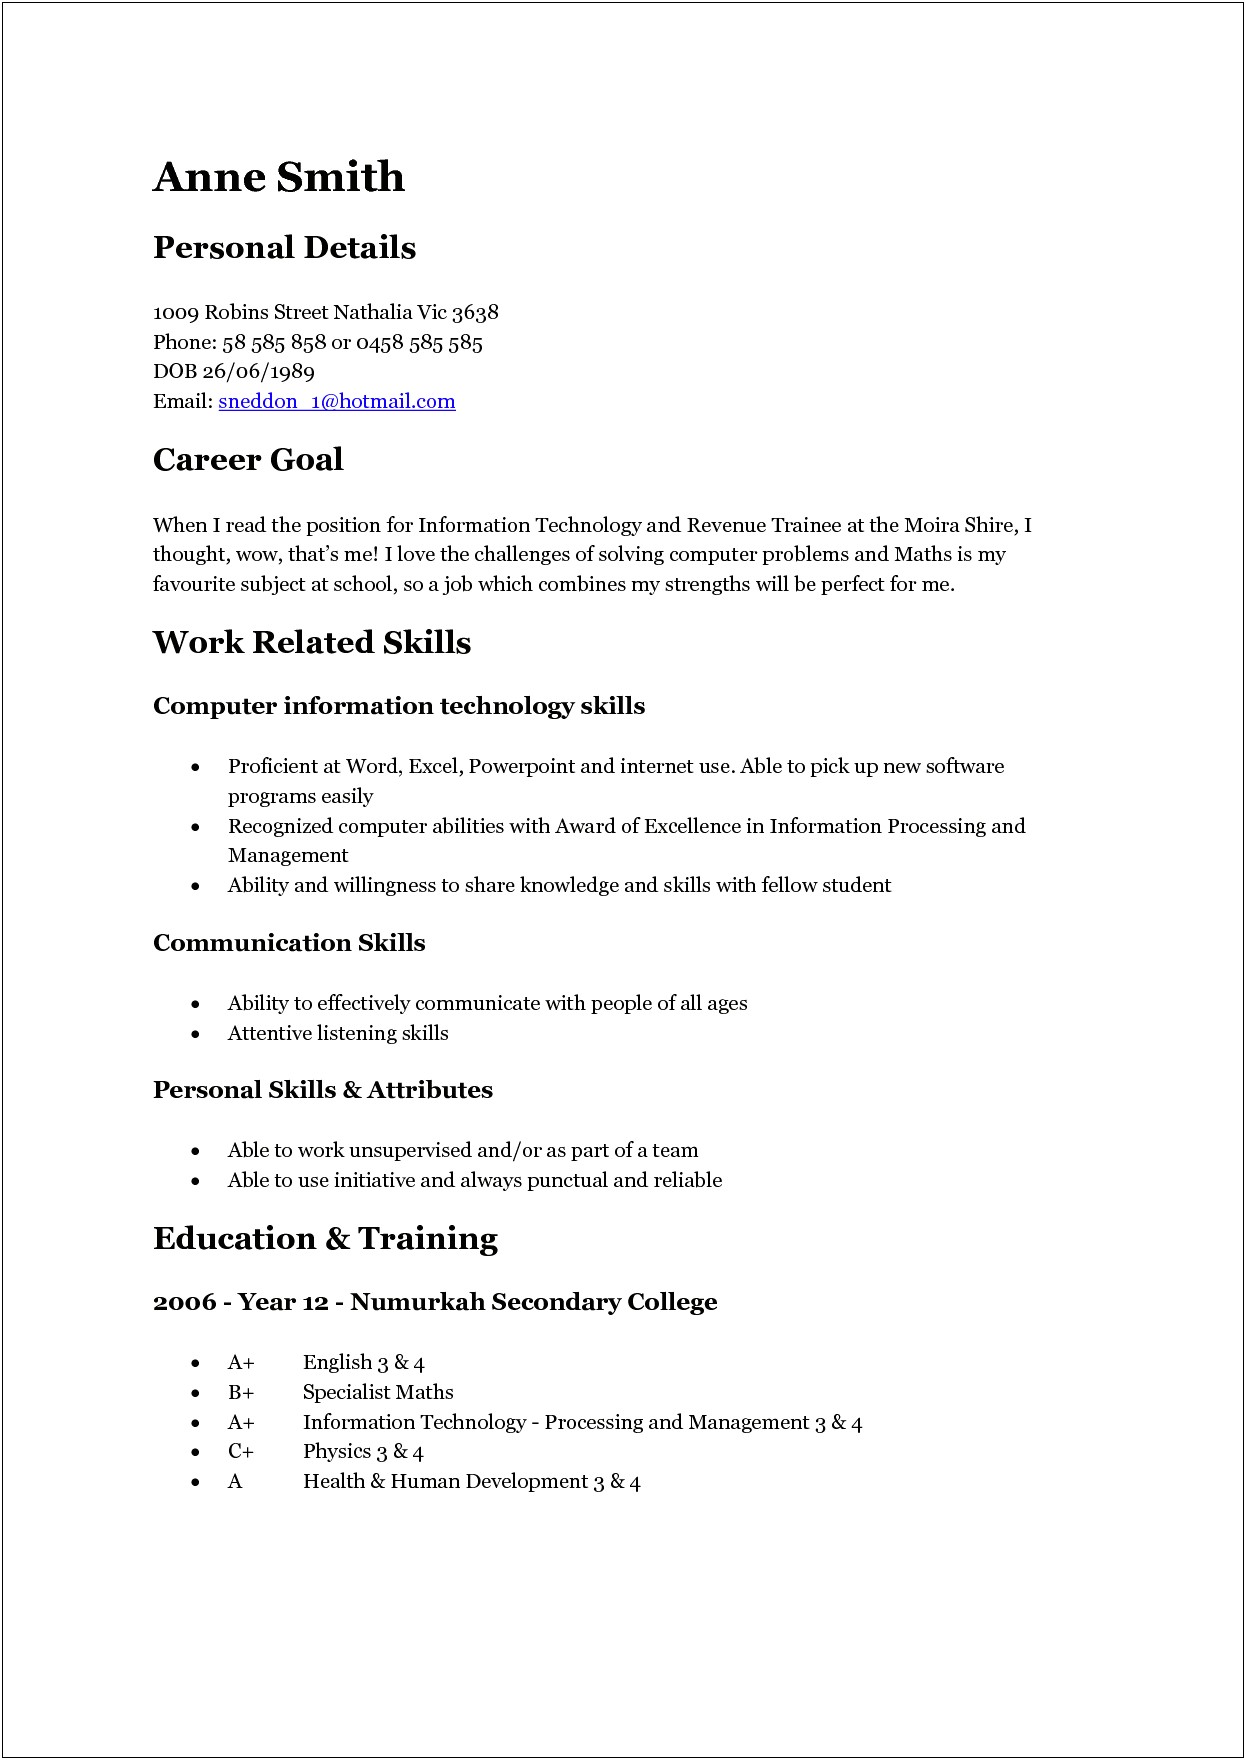 Sample Resume Templates About.com